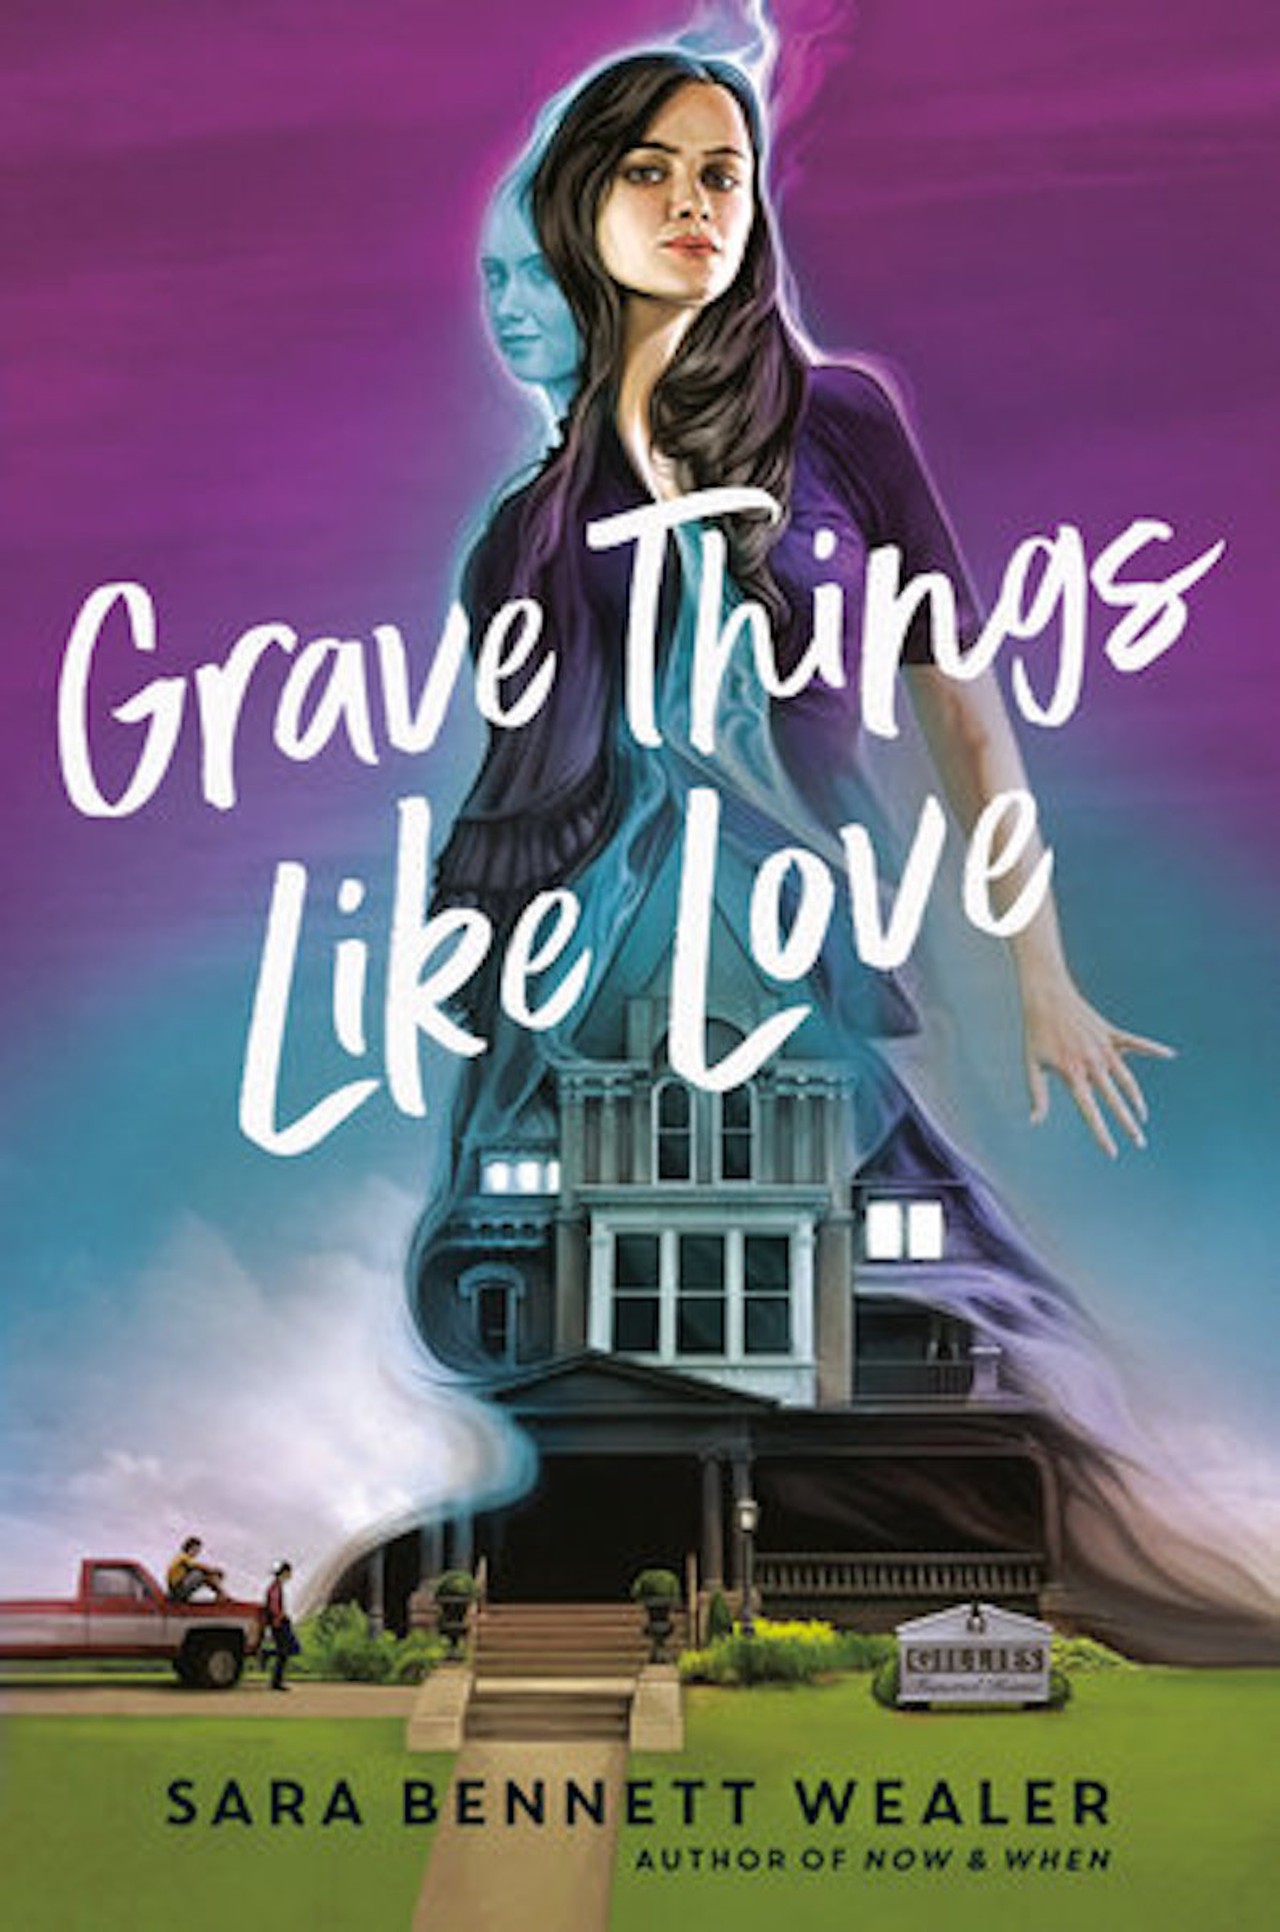 Grave Things Like Love by Sara Bennett Wealer
Ready for summer to die and spooky season to take over? Get a dose of autumn (and, yes, Halloween) with the young adult novel Grave Things Like Love, which follows Elaine, a teenager who grew up in her family’s funeral home, as she navigates changing friendships, possible paranormal activity, post-high-school decisions and romance.